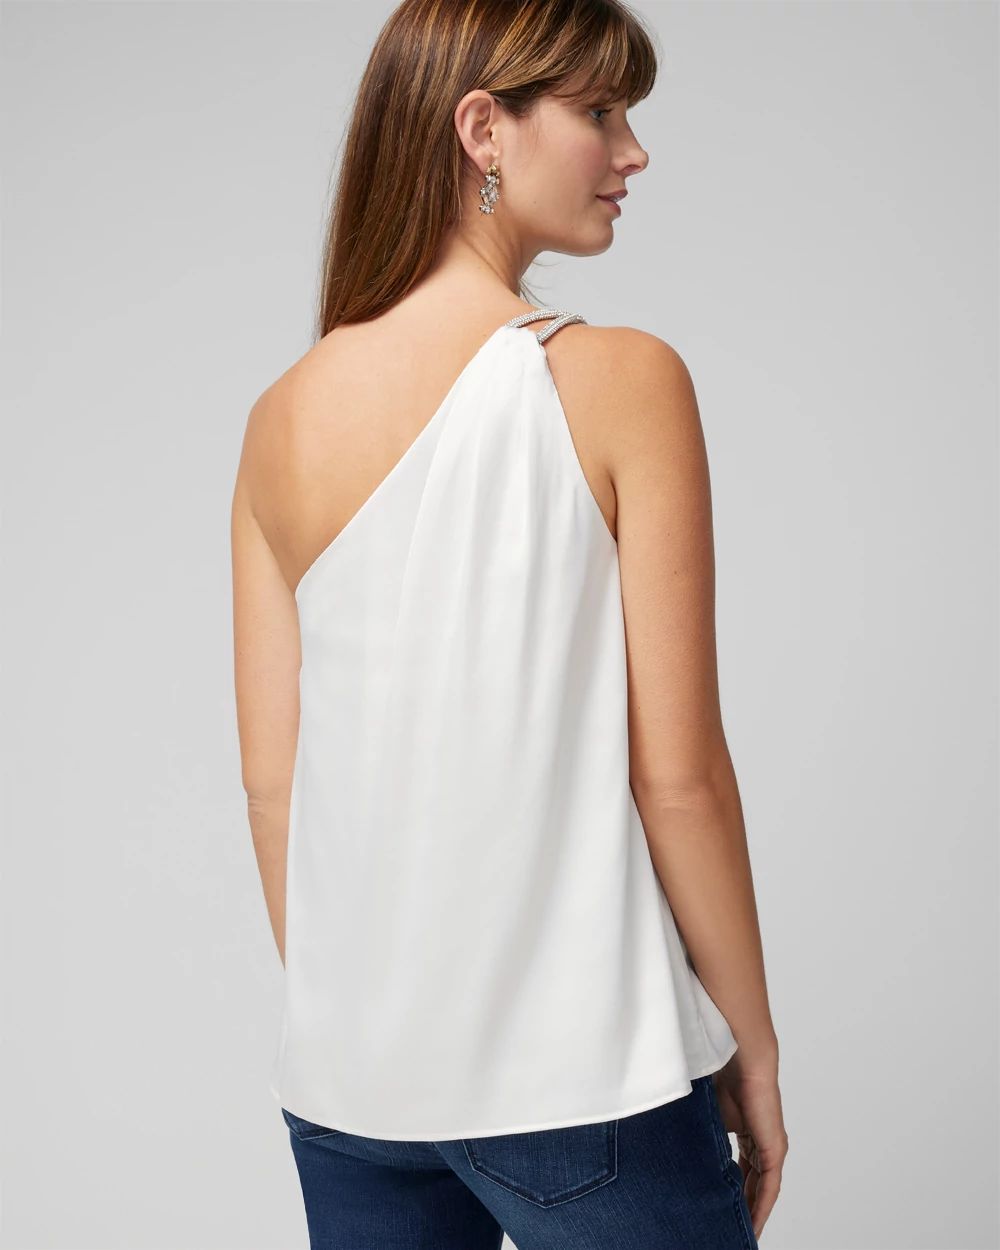 One Shoulder Satin Shell Top click to view larger image.